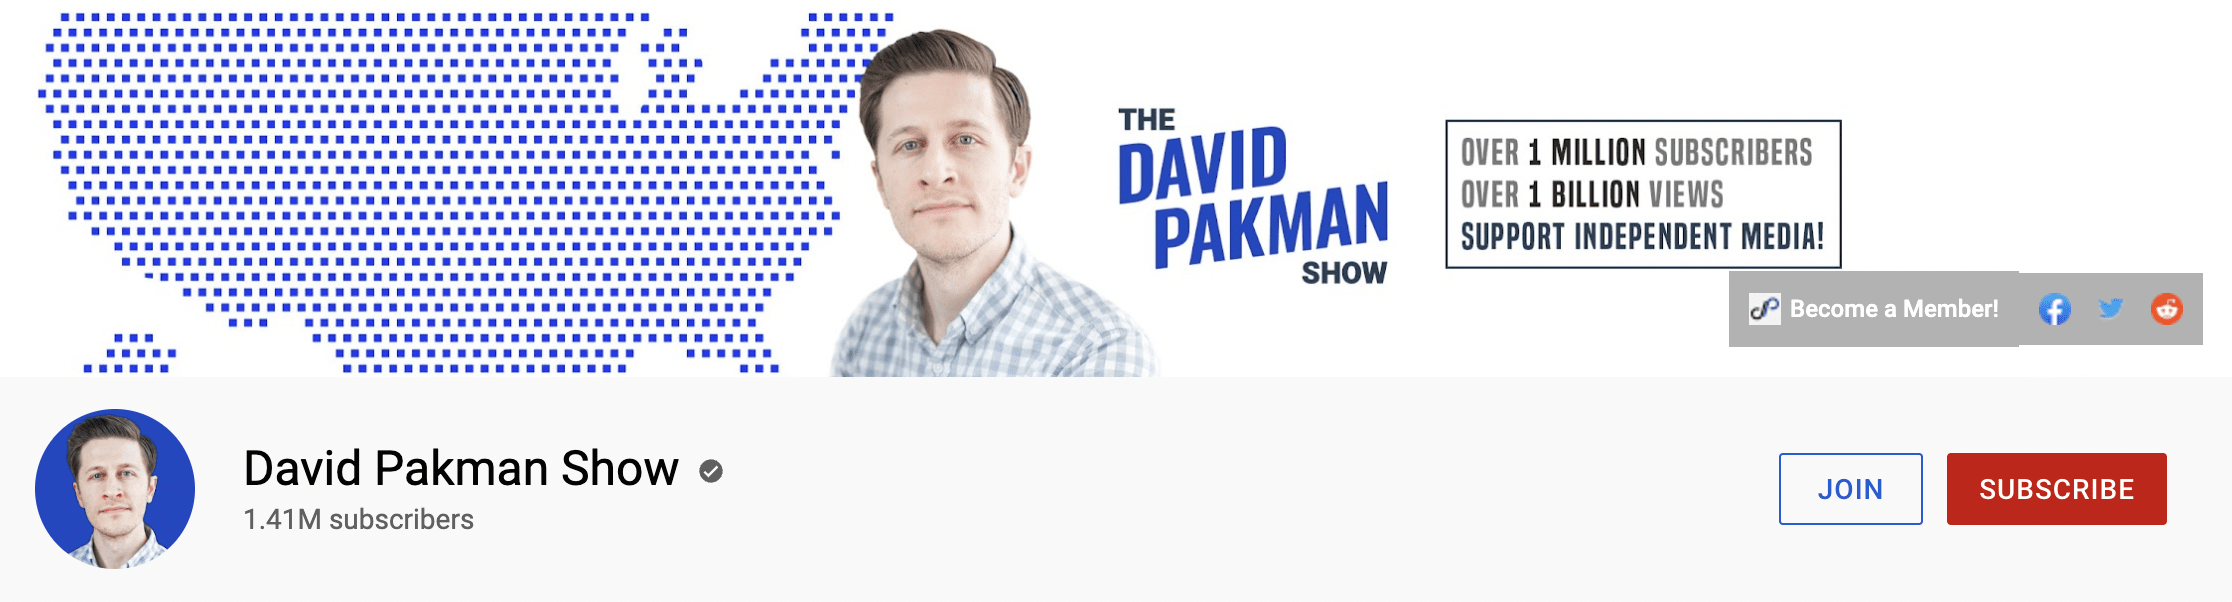 The David Pakman Show YouTube channel